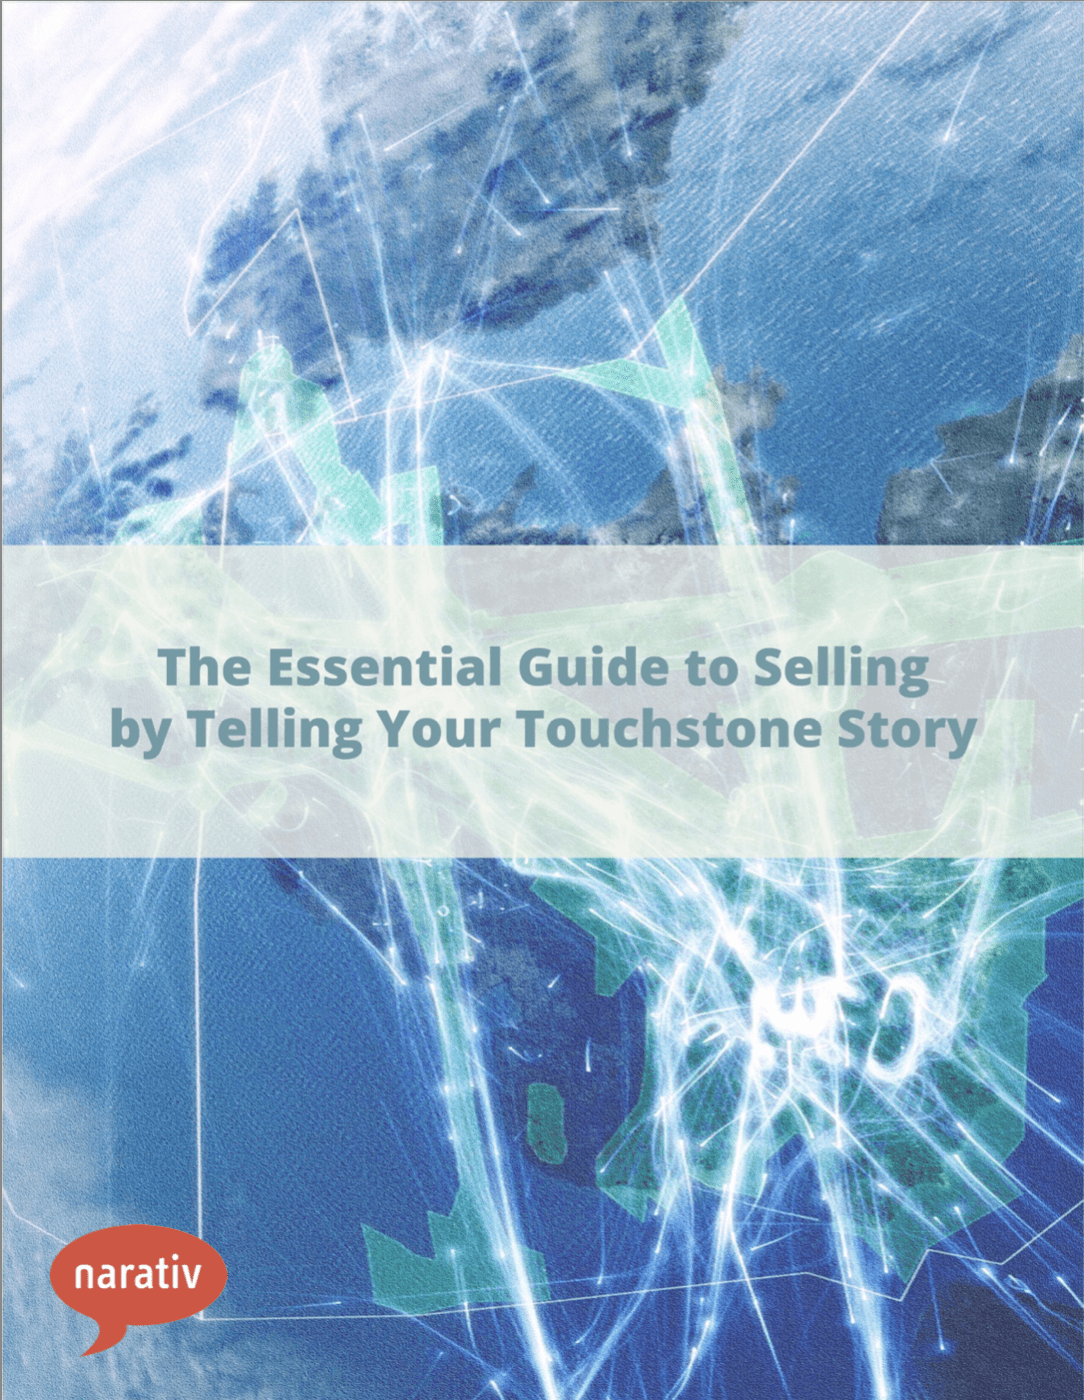 the essential guide to selling by telling your touchtone story.